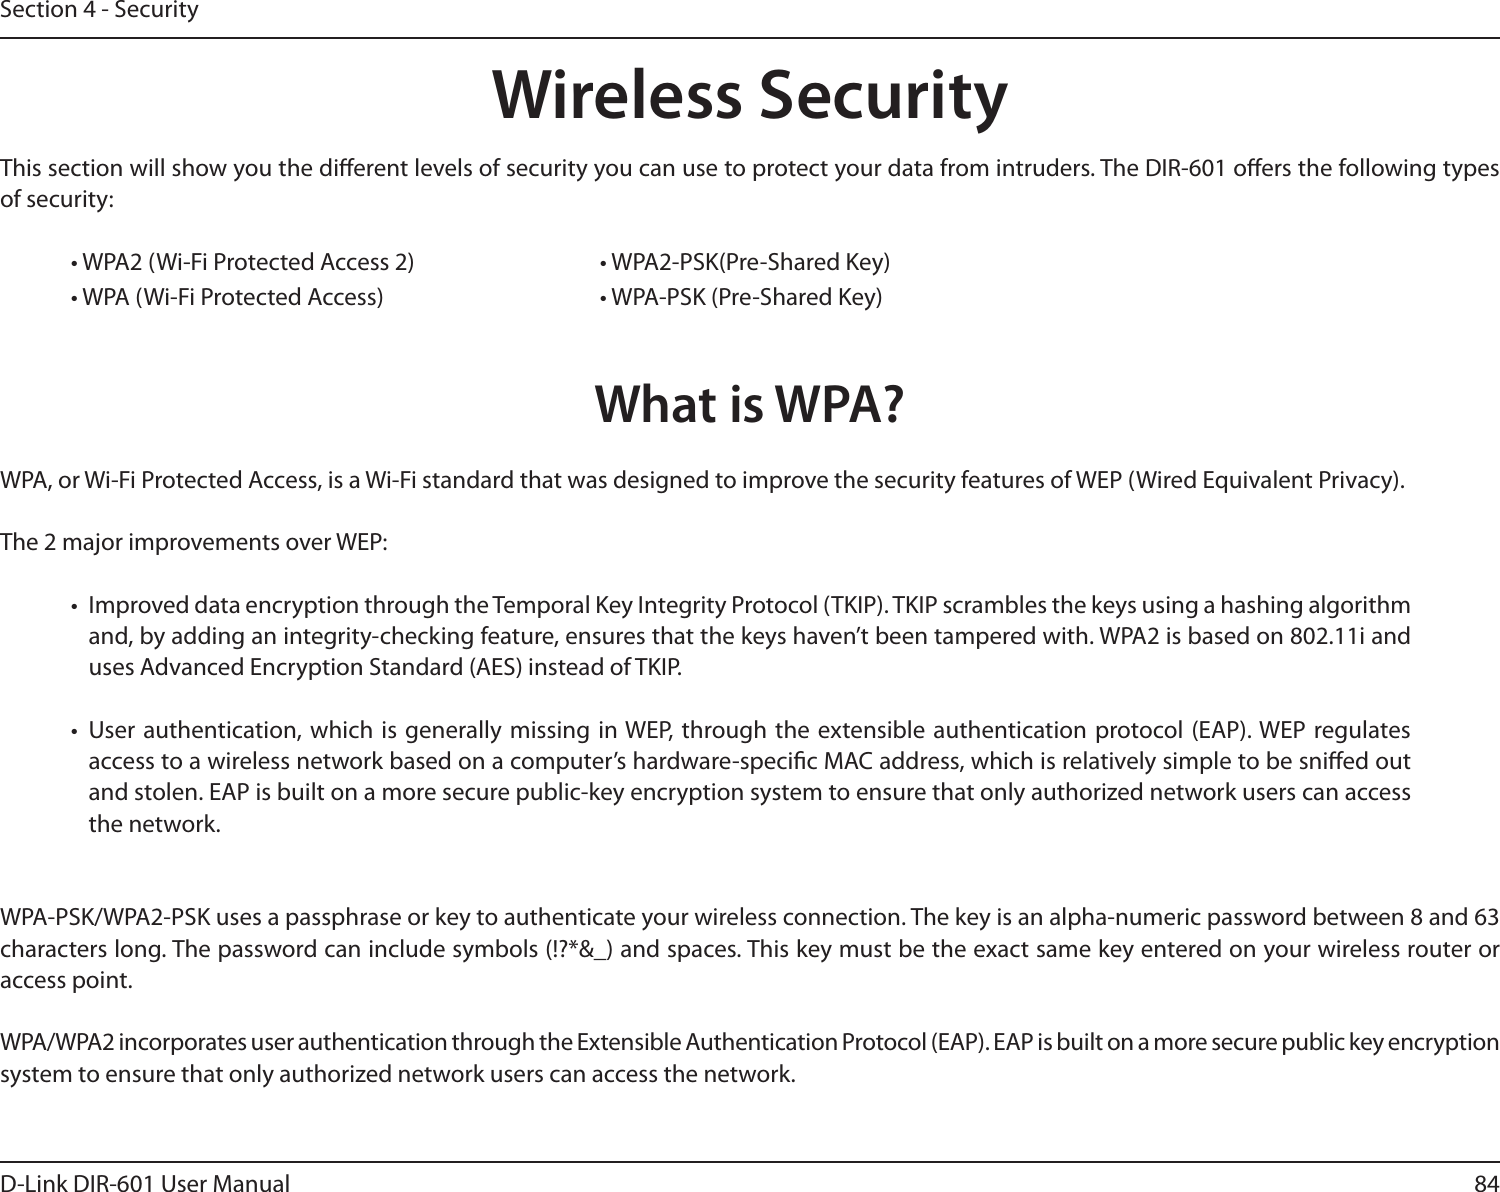 84D-Link DIR-601 User ManualSection 4 - SecurityWireless SecurityThis section will show you the dierent levels of security you can use to protect your data from intruders. The DIR-601 oers the following types of security:• WPA2 (Wi-Fi Protected Access 2)       • WPA2-PSK(Pre-Shared Key)• WPA (Wi-Fi Protected Access)      • WPA-PSK (Pre-Shared Key)What is WPA?WPA, or Wi-Fi Protected Access, is a Wi-Fi standard that was designed to improve the security features of WEP (Wired Equivalent Privacy).  The 2 major improvements over WEP: •  Improved data encryption through the Temporal Key Integrity Protocol (TKIP). TKIP scrambles the keys using a hashing algorithm and, by adding an integrity-checking feature, ensures that the keys haven’t been tampered with. WPA2 is based on 802.11i and uses Advanced Encryption Standard (AES) instead of TKIP.•  User authentication, which  is generally missing  in WEP, through the extensible authentication  protocol (EAP). WEP regulates access to a wireless network based on a computer’s hardware-specic MAC address, which is relatively simple to be snied out and stolen. EAP is built on a more secure public-key encryption system to ensure that only authorized network users can access the network.WPA-PSK/WPA2-PSK uses a passphrase or key to authenticate your wireless connection. The key is an alpha-numeric password between 8 and 63 characters long. The password can include symbols (!?*&amp;_) and spaces. This key must be the exact same key entered on your wireless router or access point.WPA/WPA2 incorporates user authentication through the Extensible Authentication Protocol (EAP). EAP is built on a more secure public key encryption system to ensure that only authorized network users can access the network.